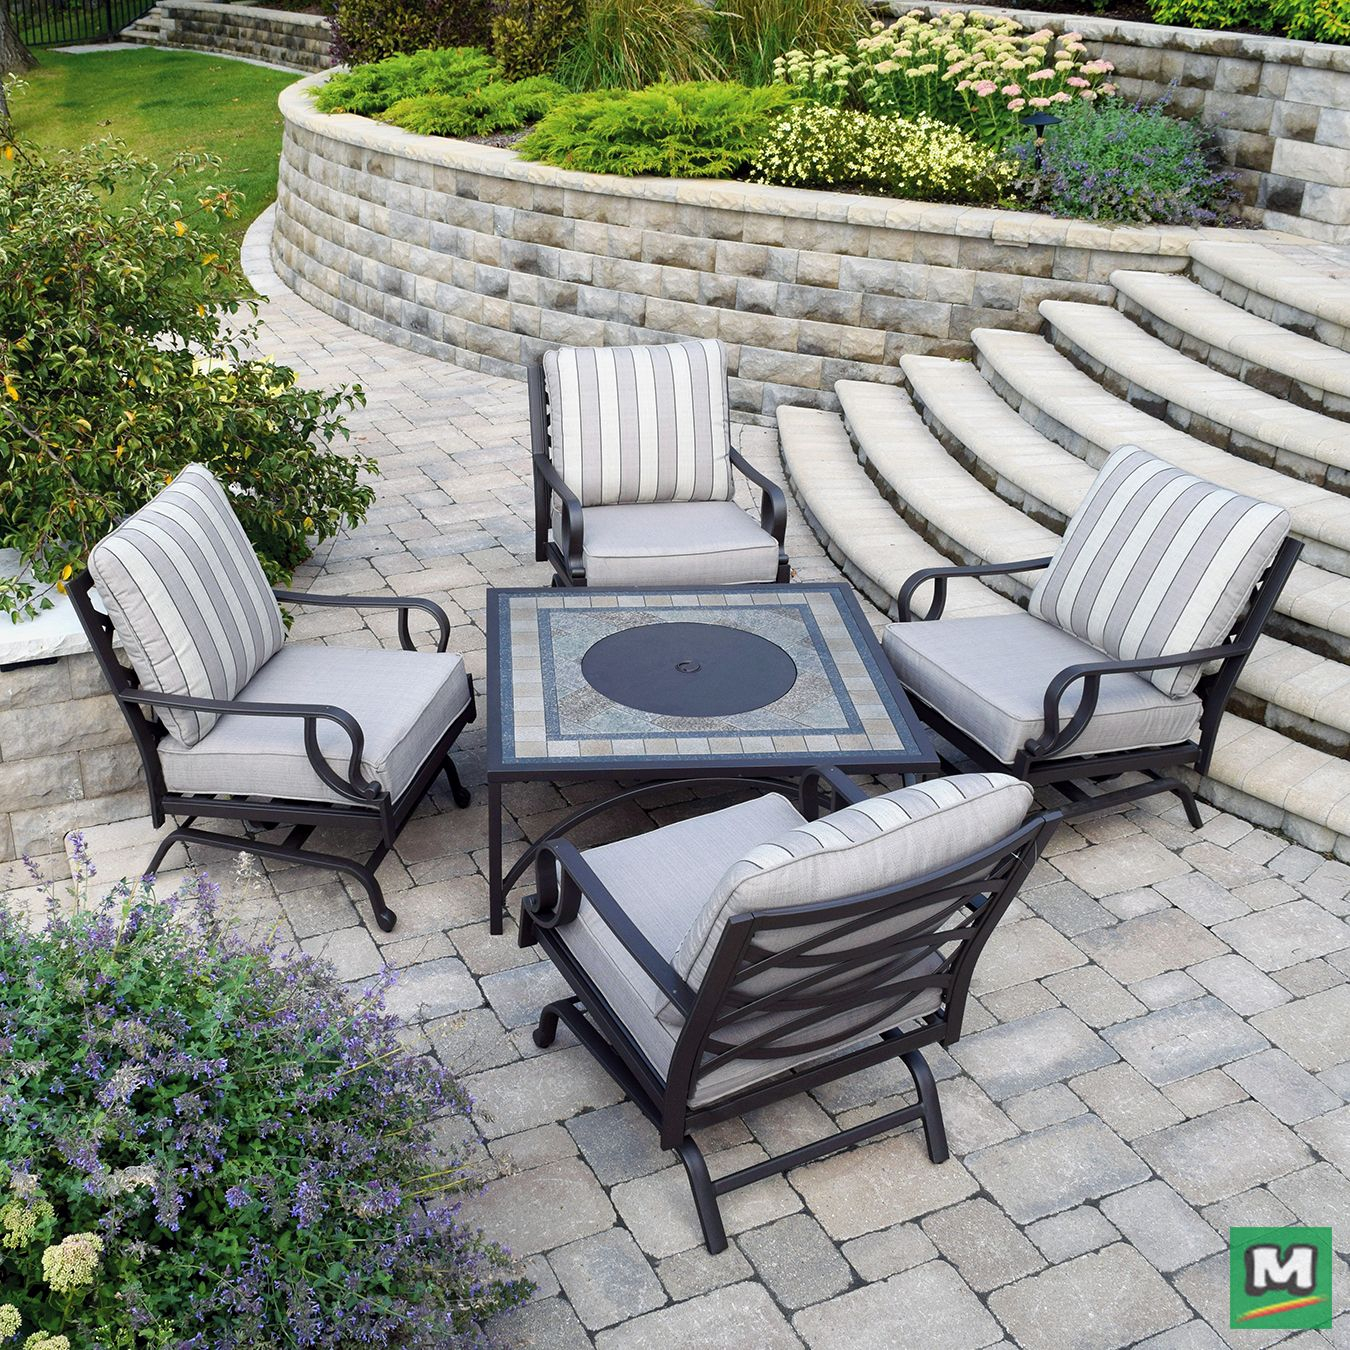 This Backyard Creations 5 Piece Stone Manor Fire Pit intended for size 1350 X 1350